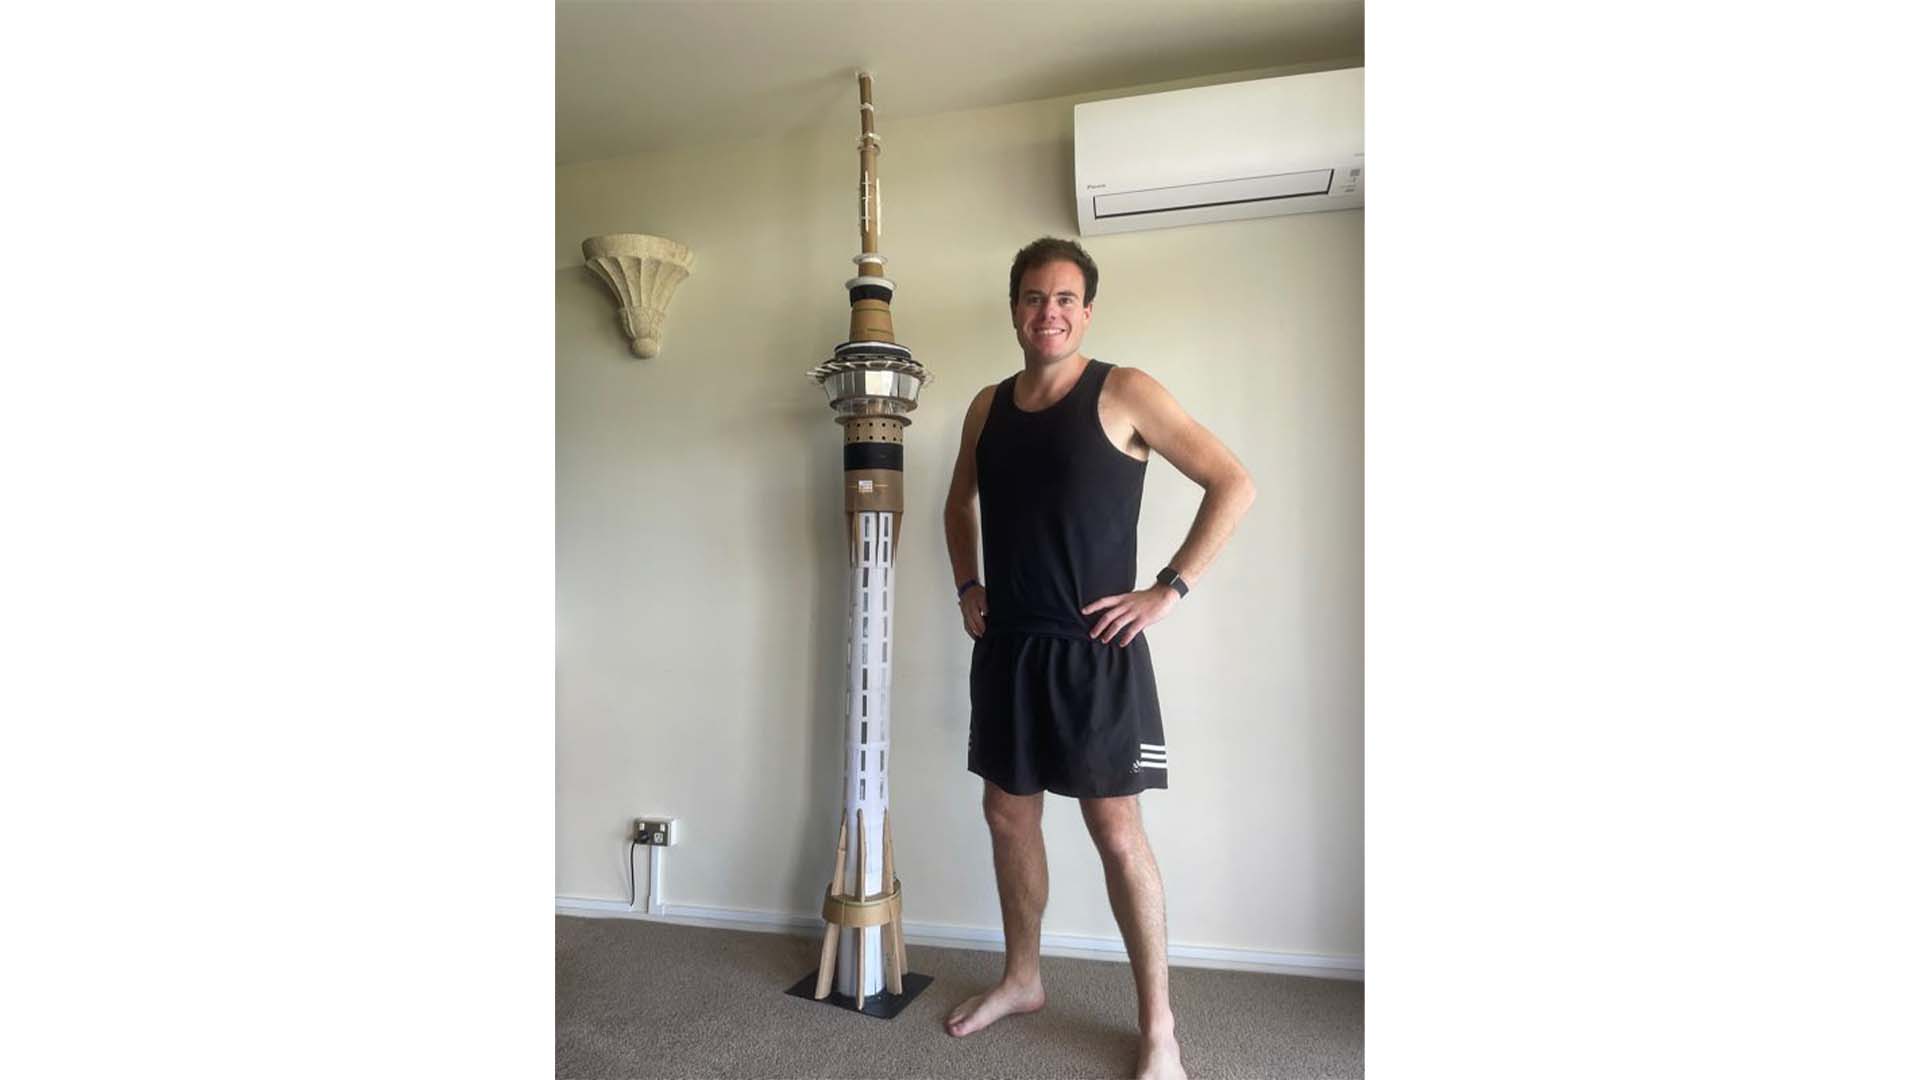 A 2.3m tall Sky Tower made from MIQ trash by Lloyd, sold for $605 on Trade Me.